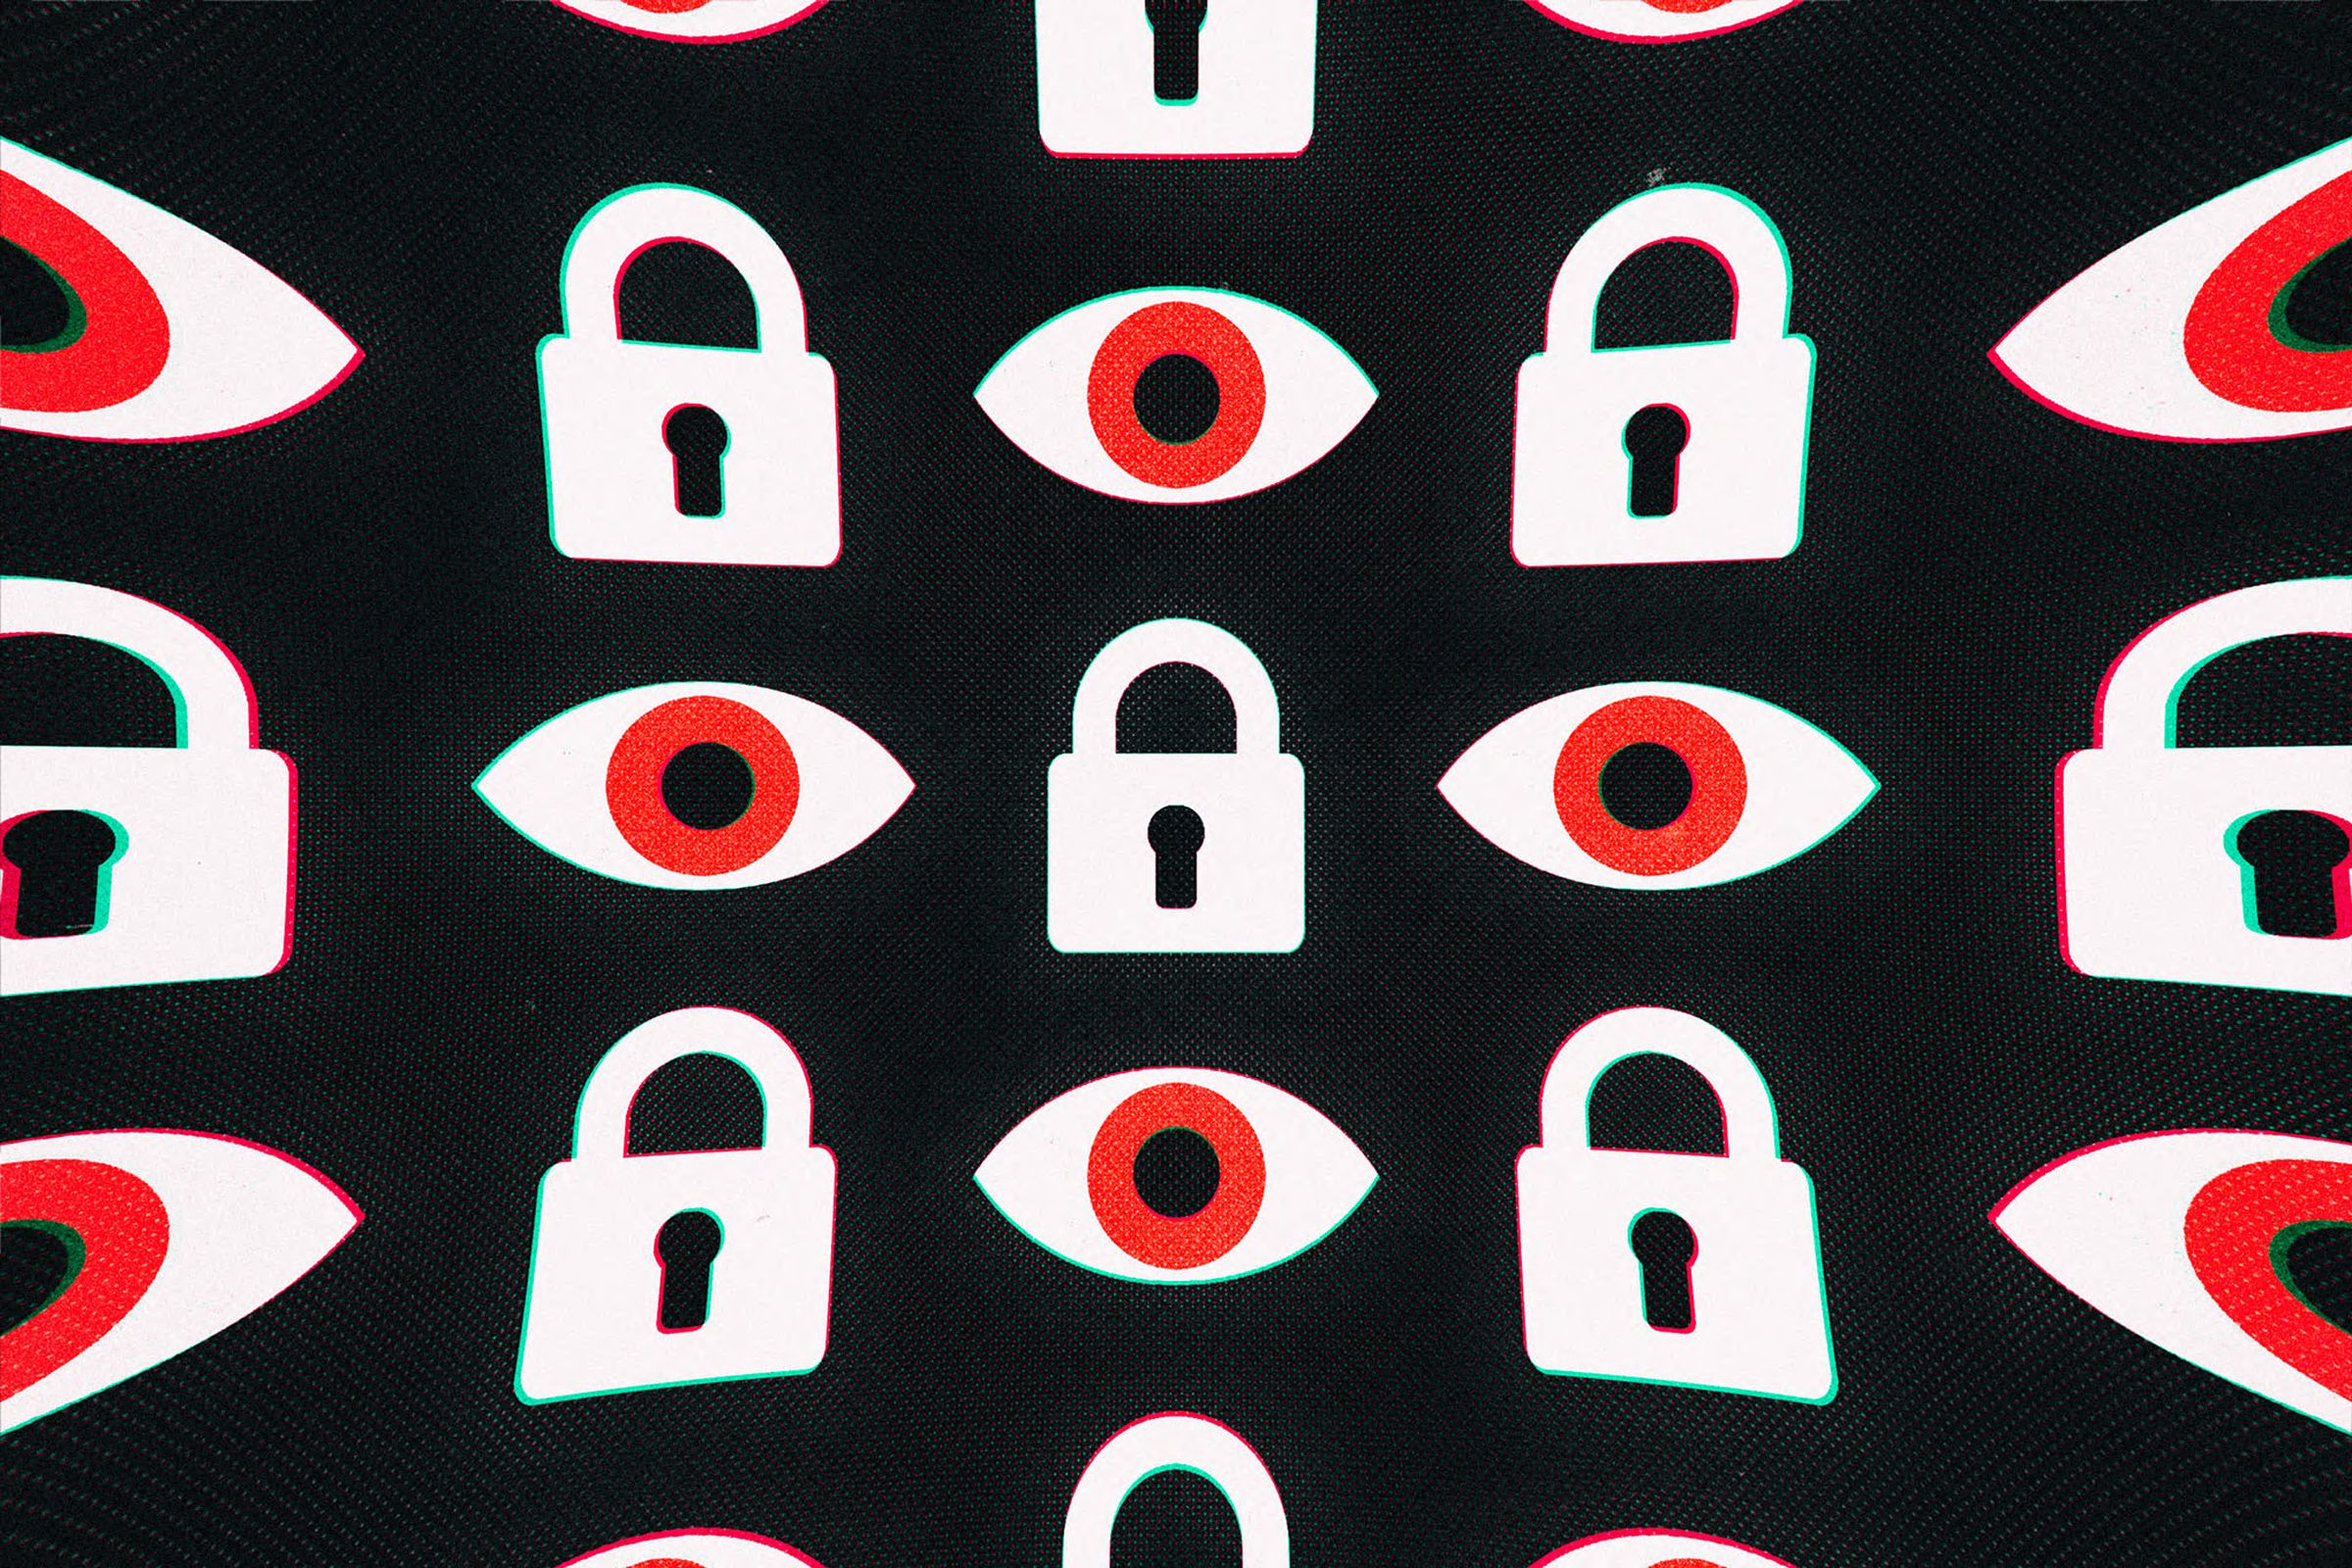 An illustration featuring eyes and locks